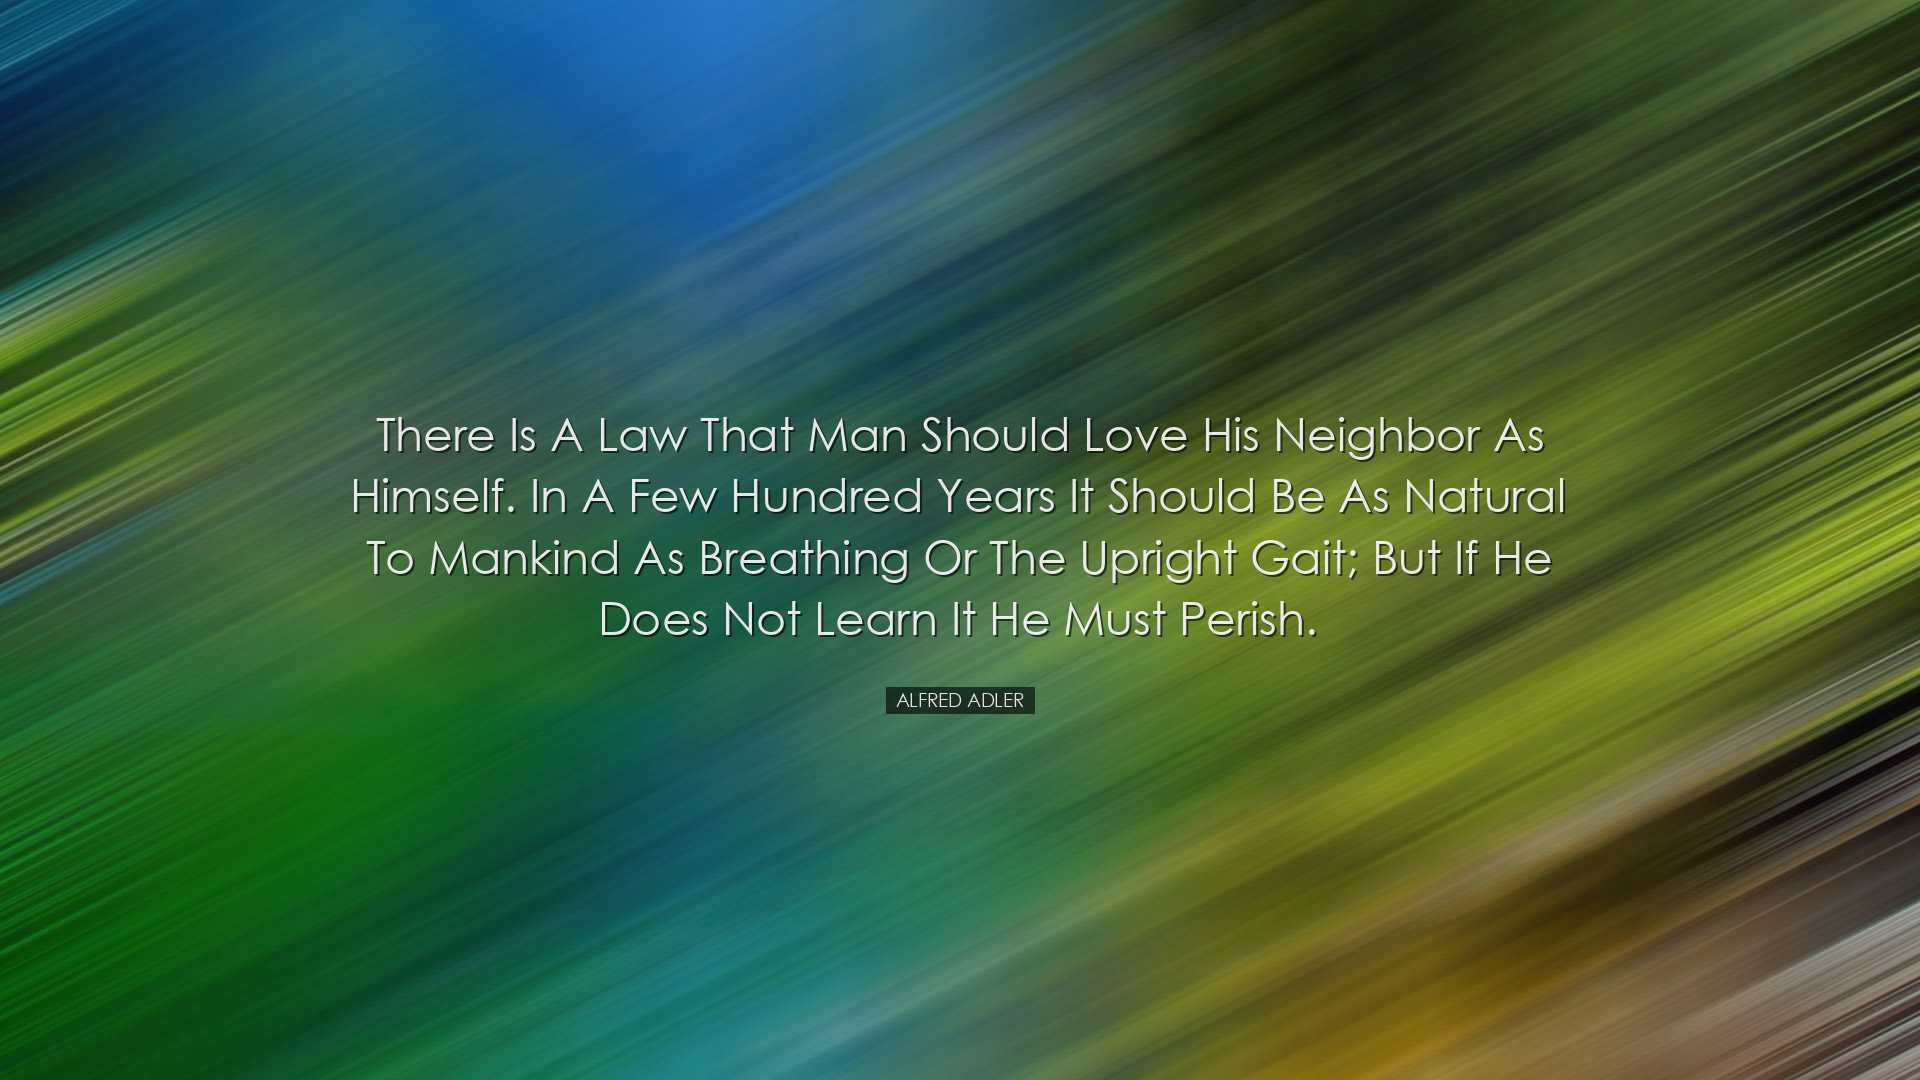 There is a law that man should love his neighbor as himself. In a